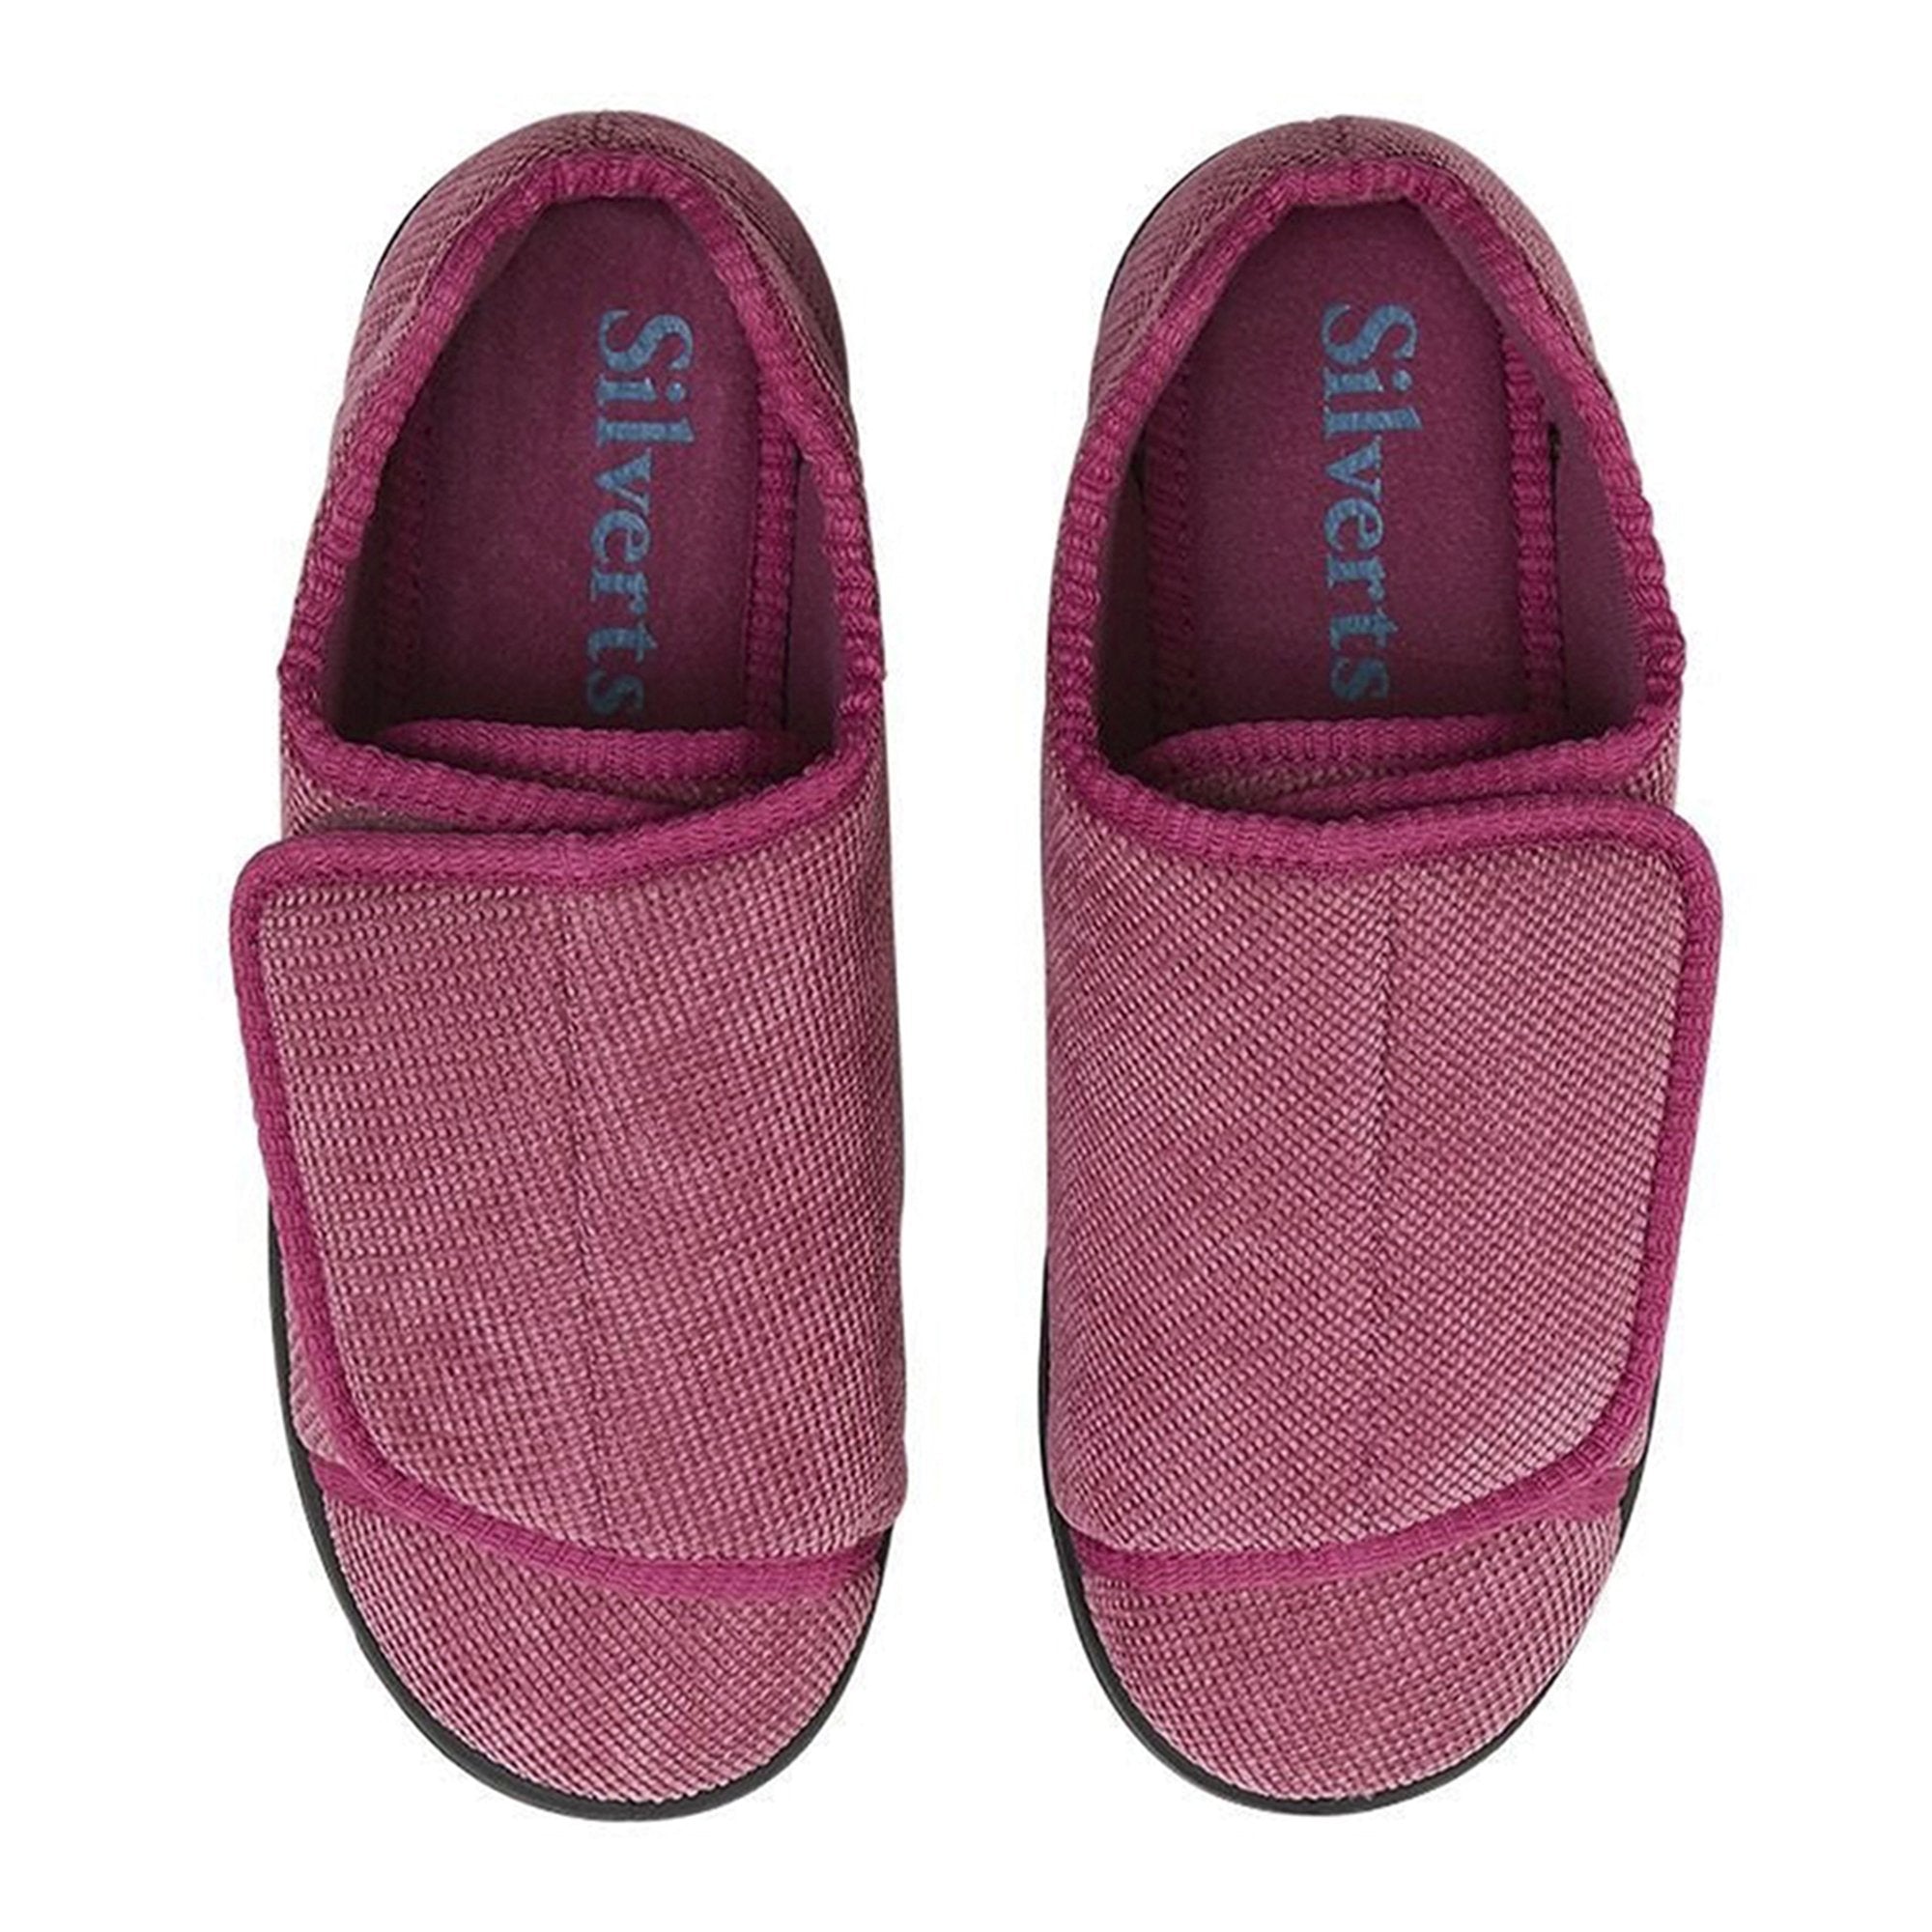 Slippers Silverts® Size 7 / 2X-Wide Dusty Rose Easy Closure